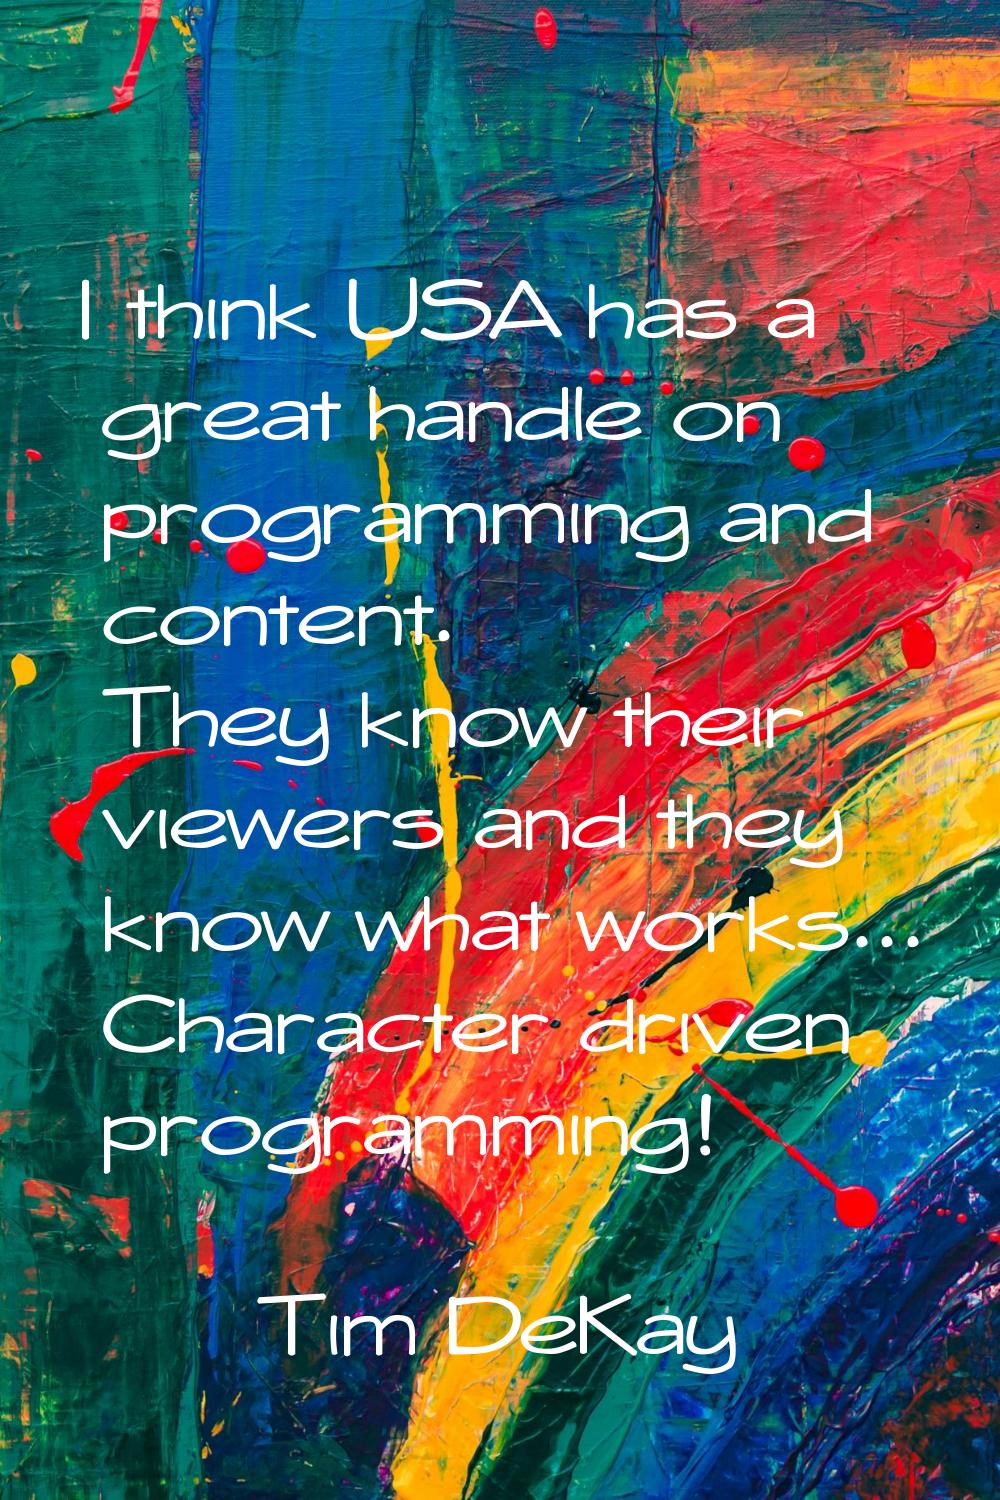 I think USA has a great handle on programming and content. They know their viewers and they know wh